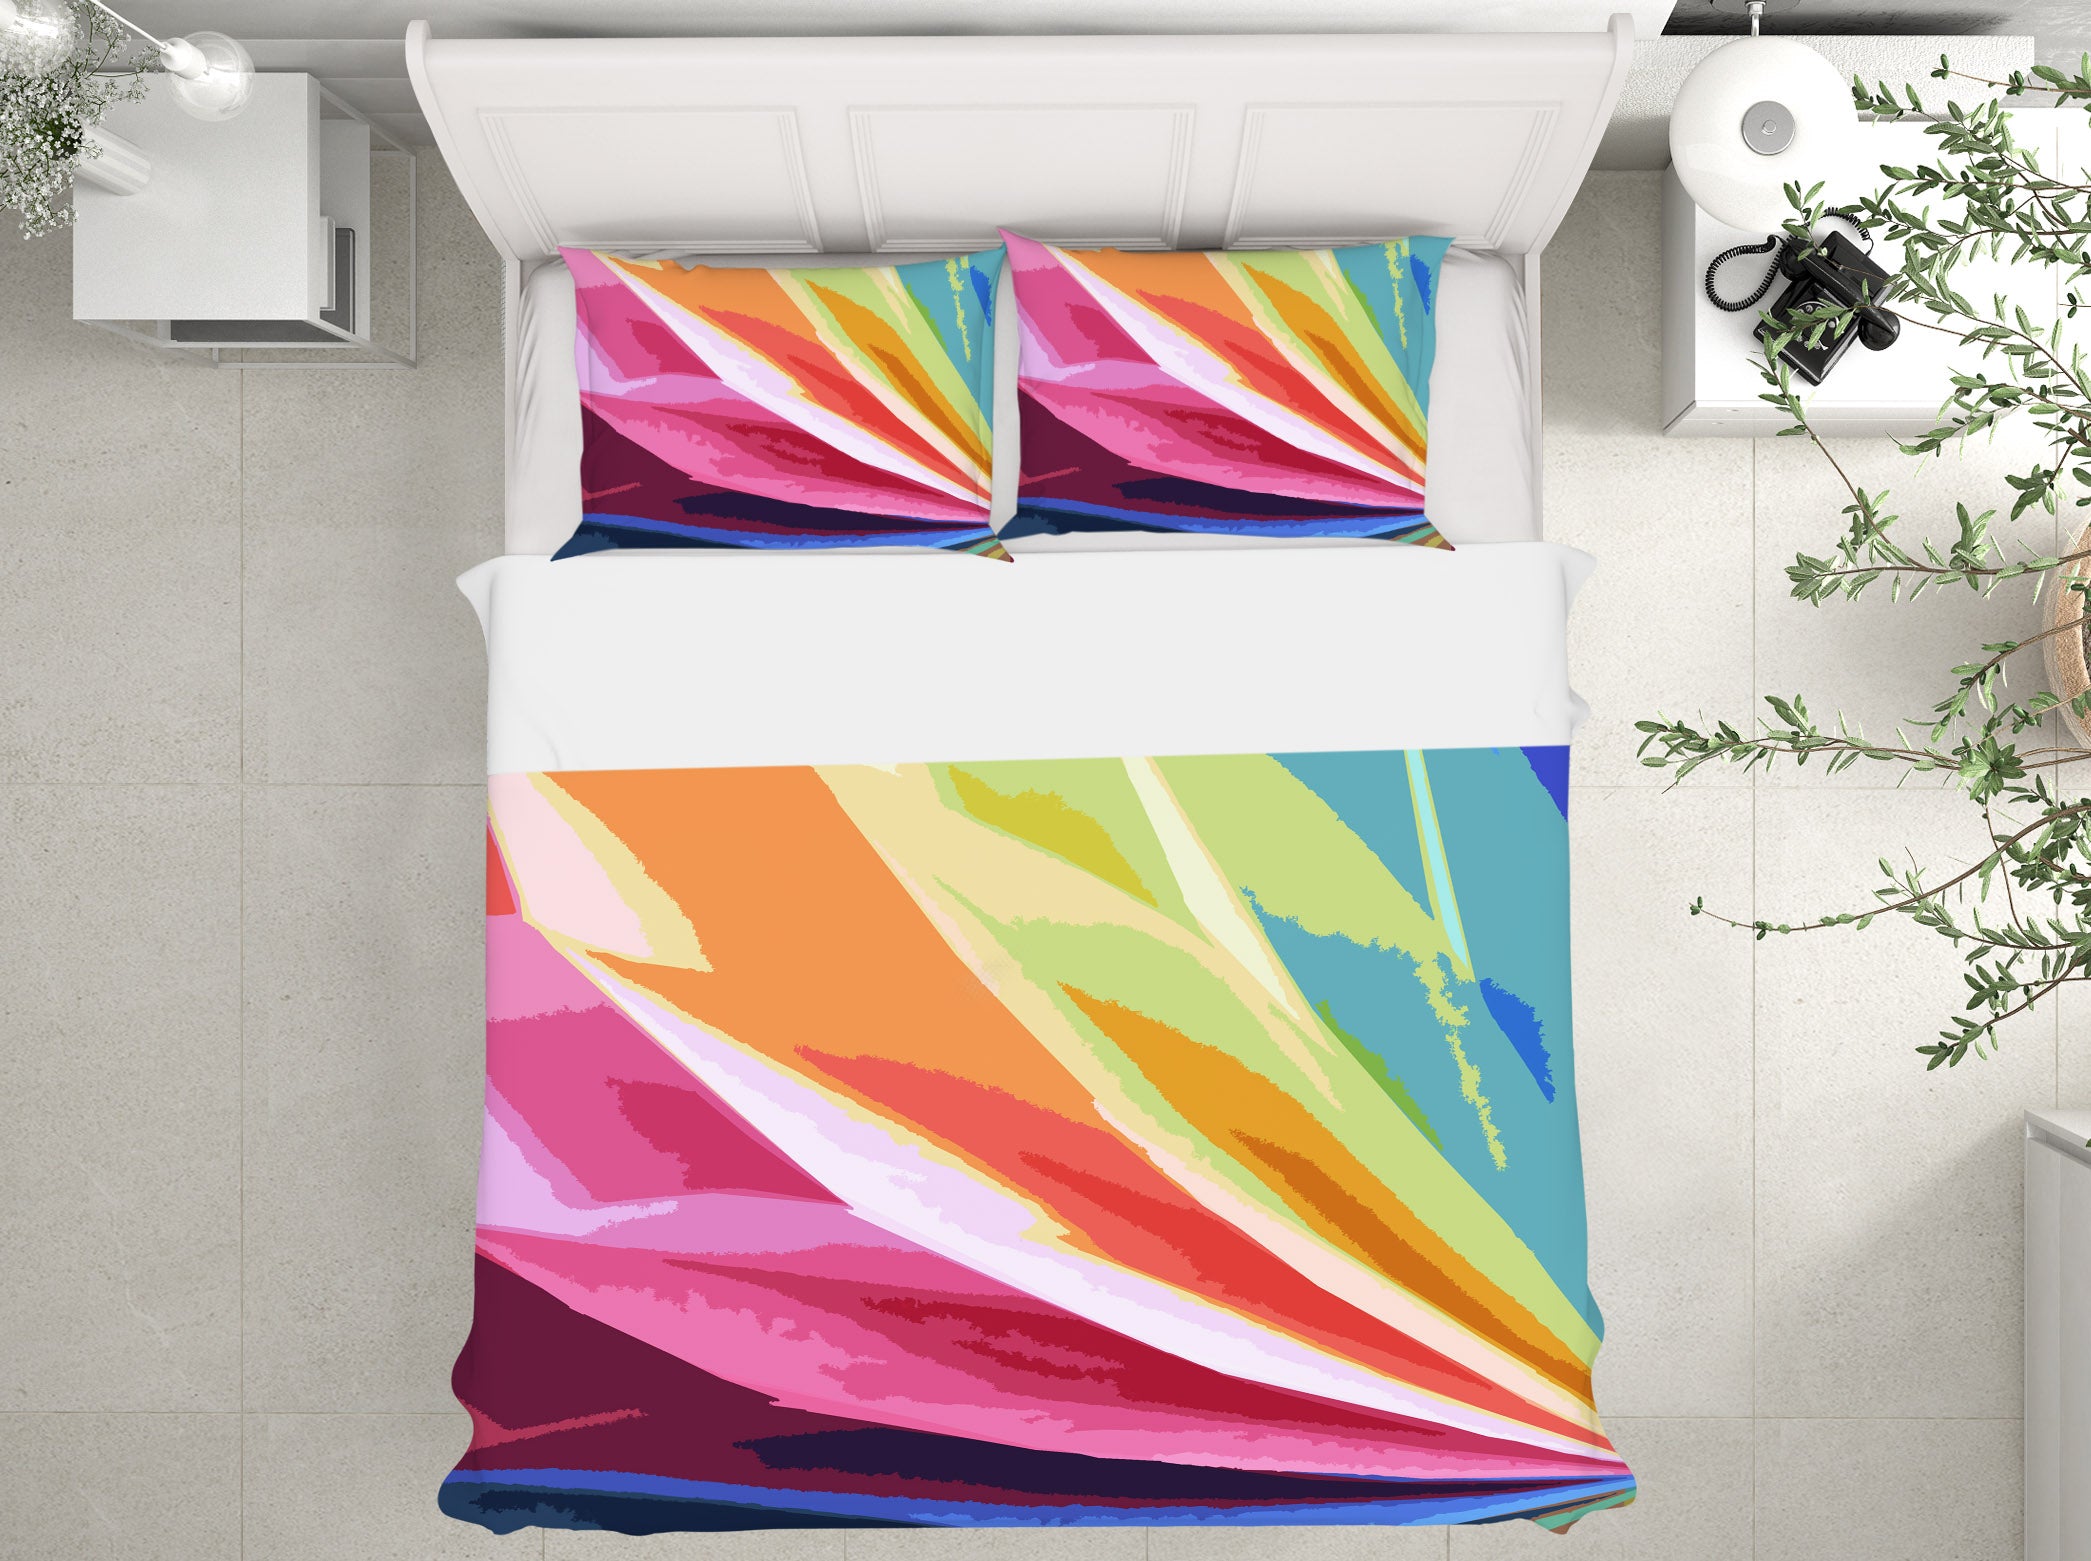 3D Colorful 70024 Shandra Smith Bedding Bed Pillowcases Quilt